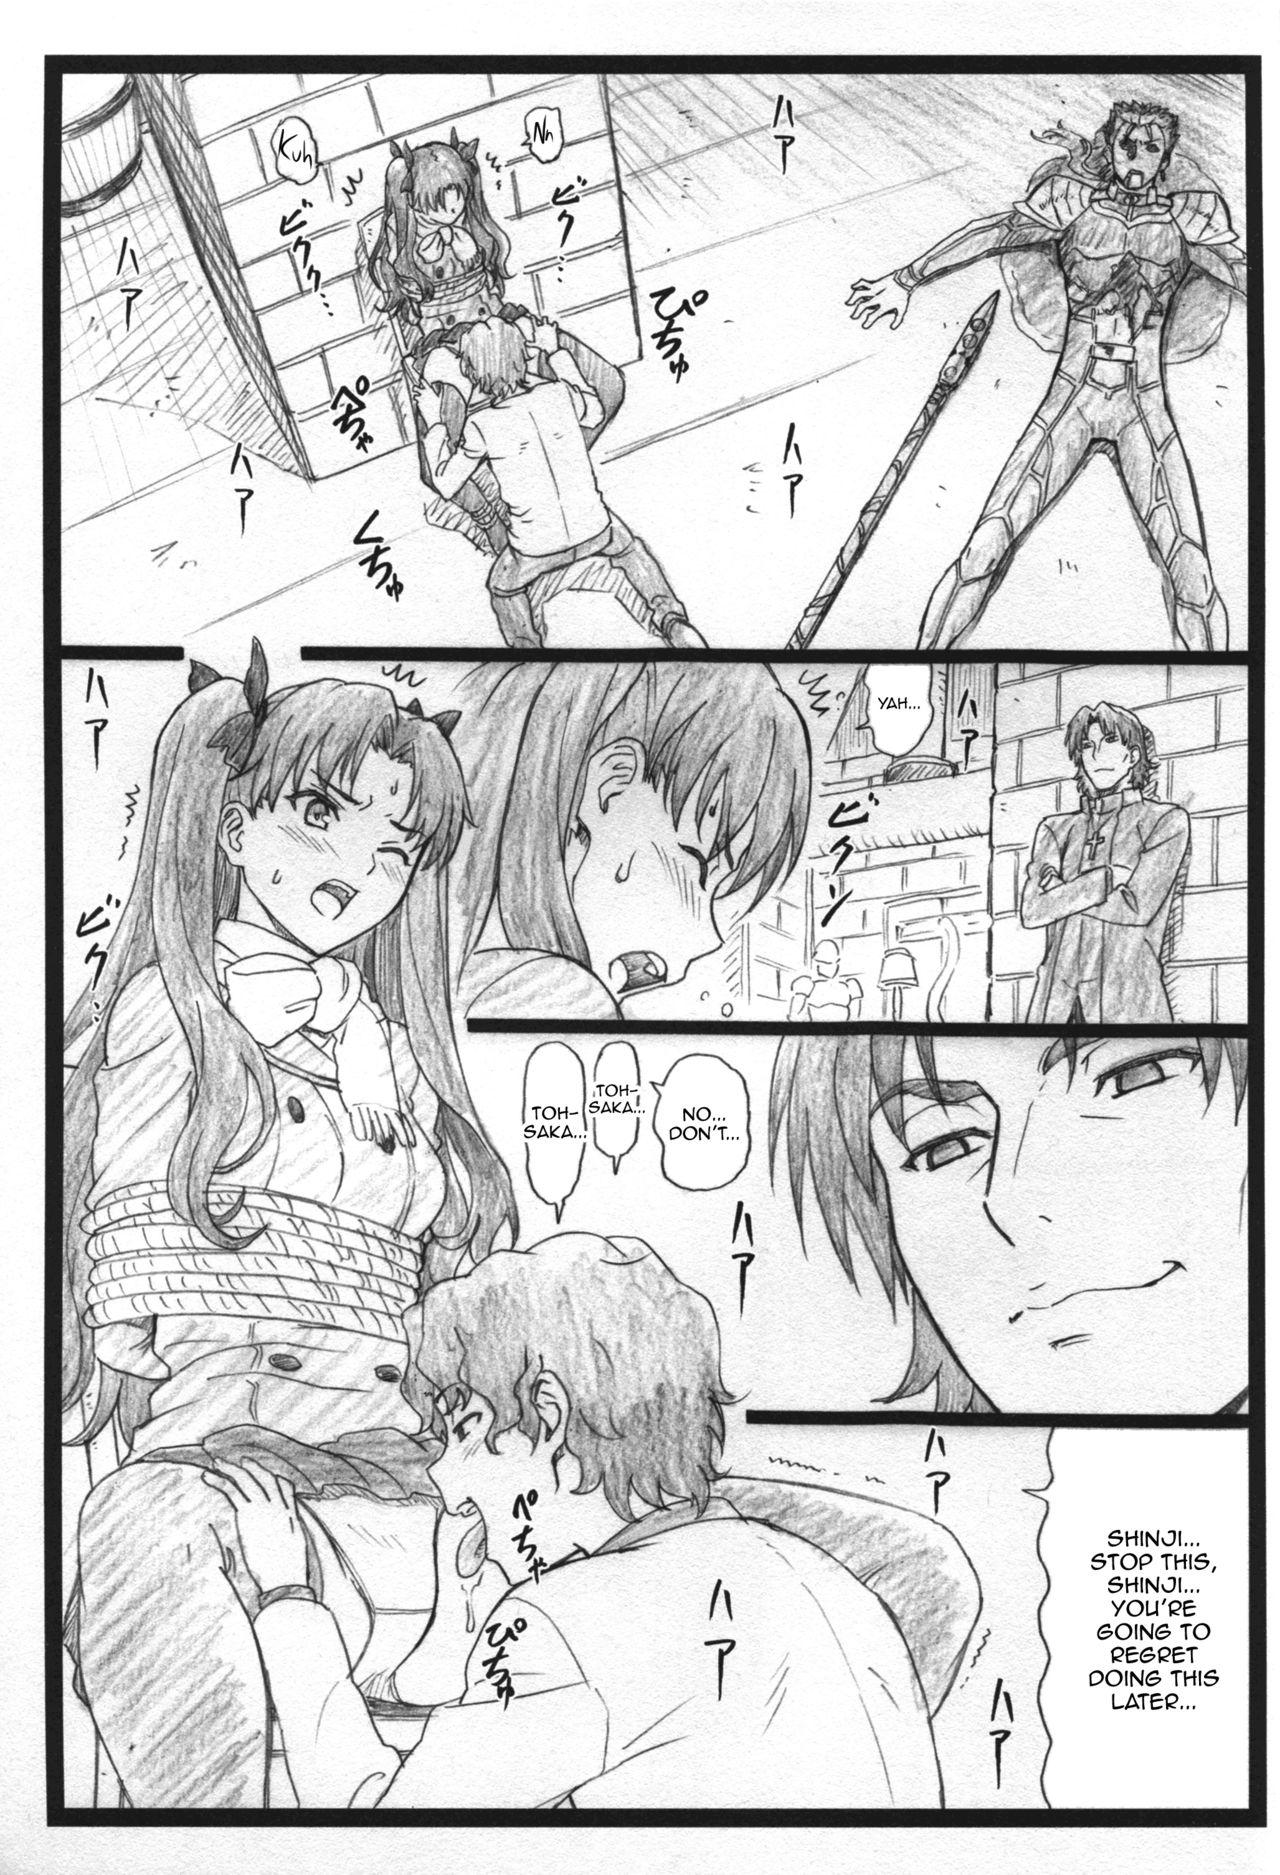 Bangkok Rin to Shite... | With Rin... - Fate stay night Gay Blondhair - Page 3